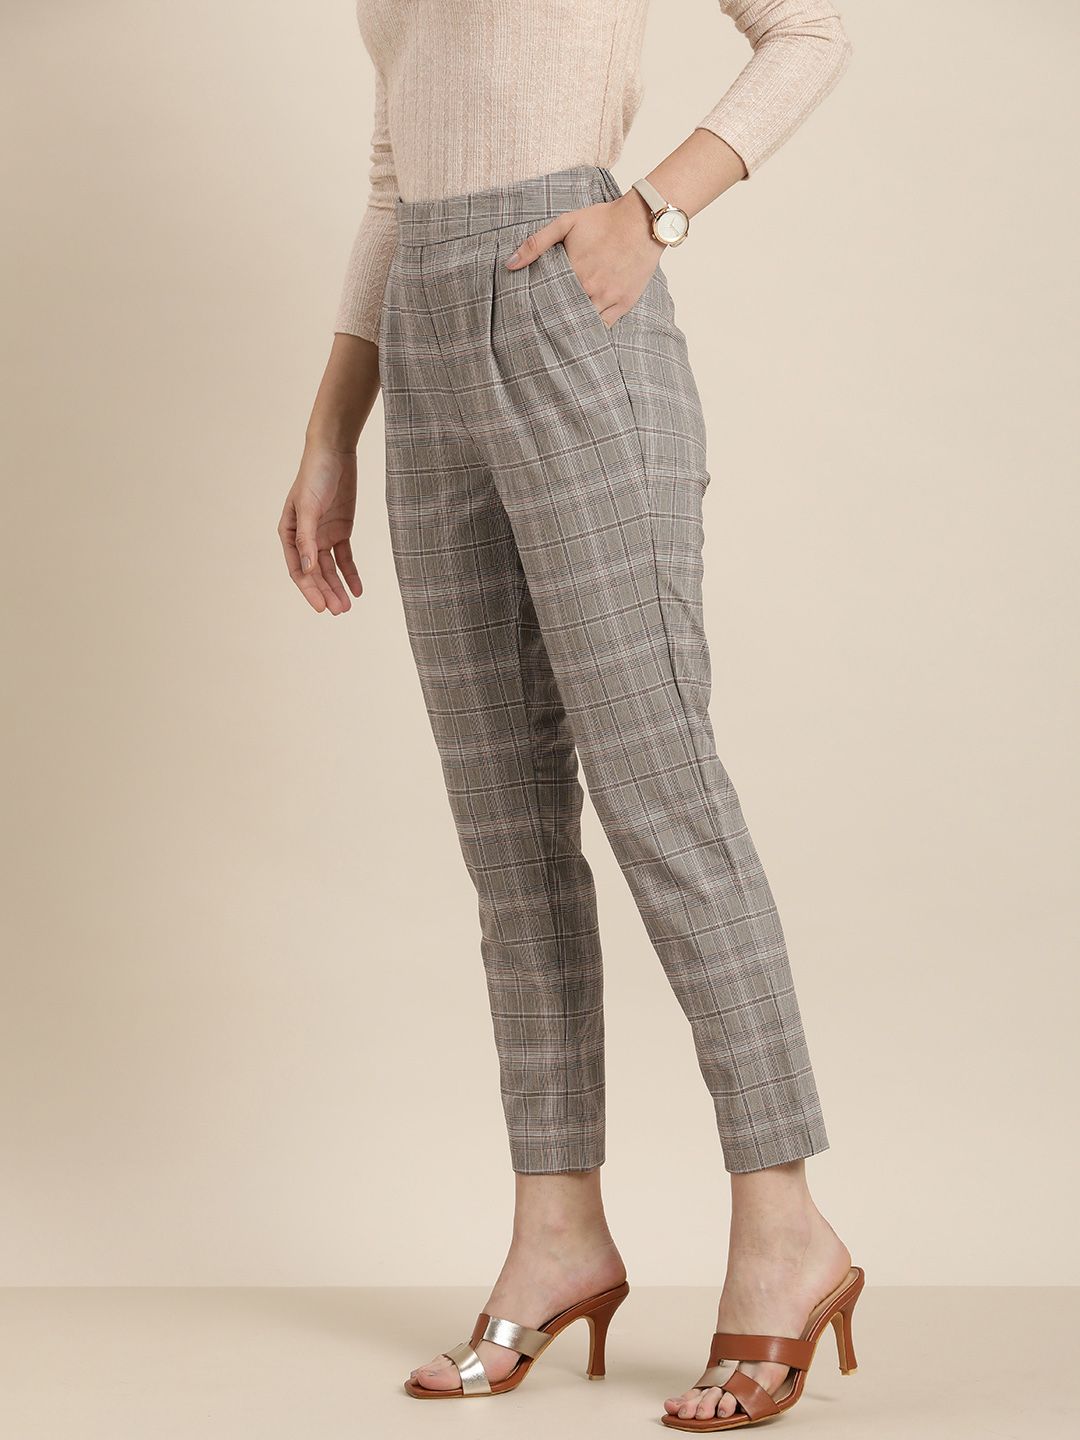 her by invictus Women Brown & Black Checked Trousers Price in India